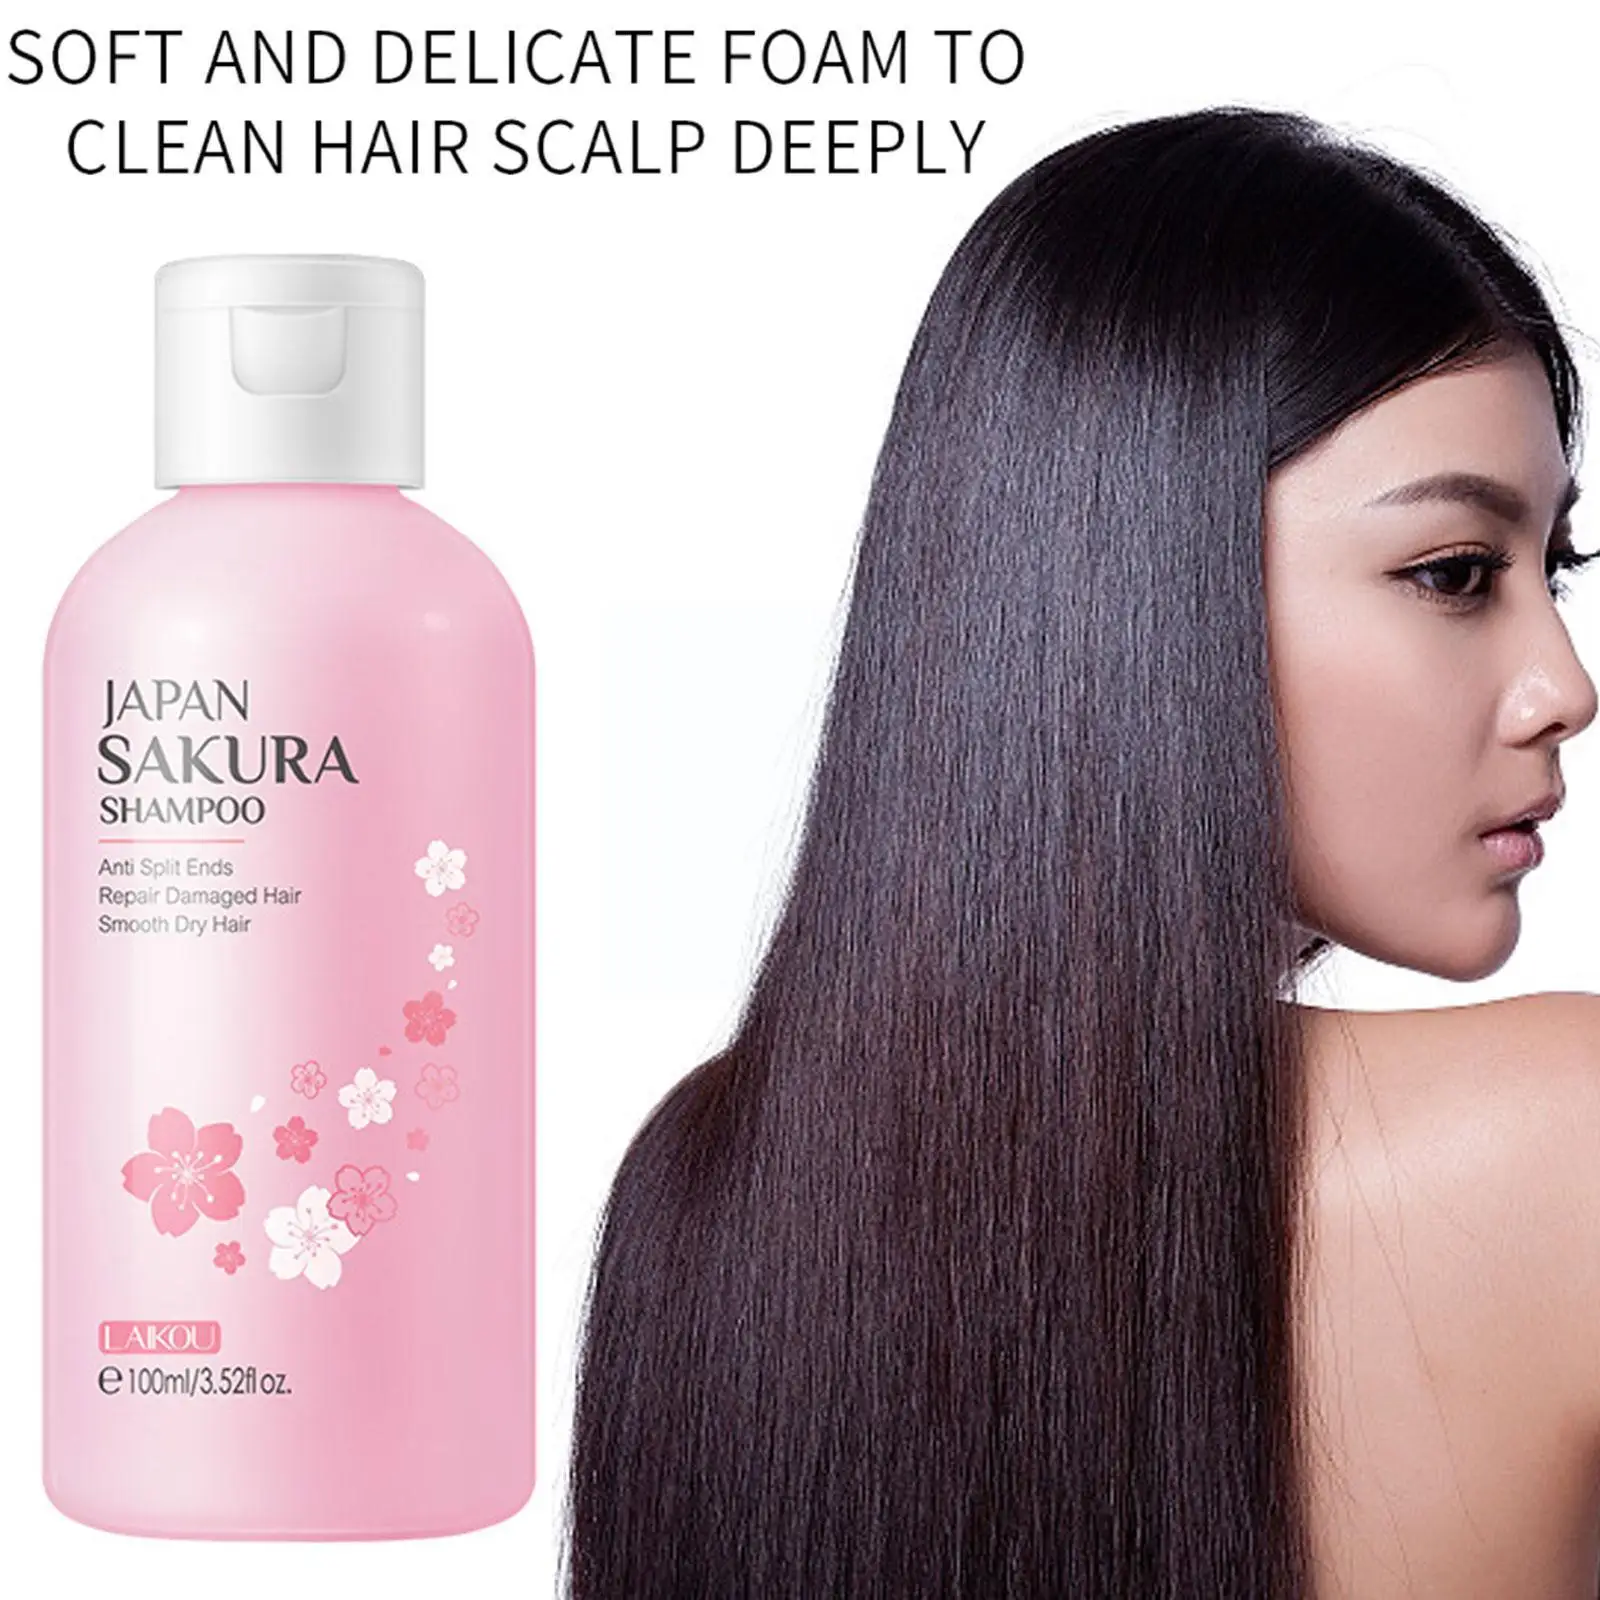 

Shampoo Hair Cleansing Care Soft Smooth Hair Refreshing Fragrance Camomila Coconut Oil For Hair Curly Hair Products E0I2